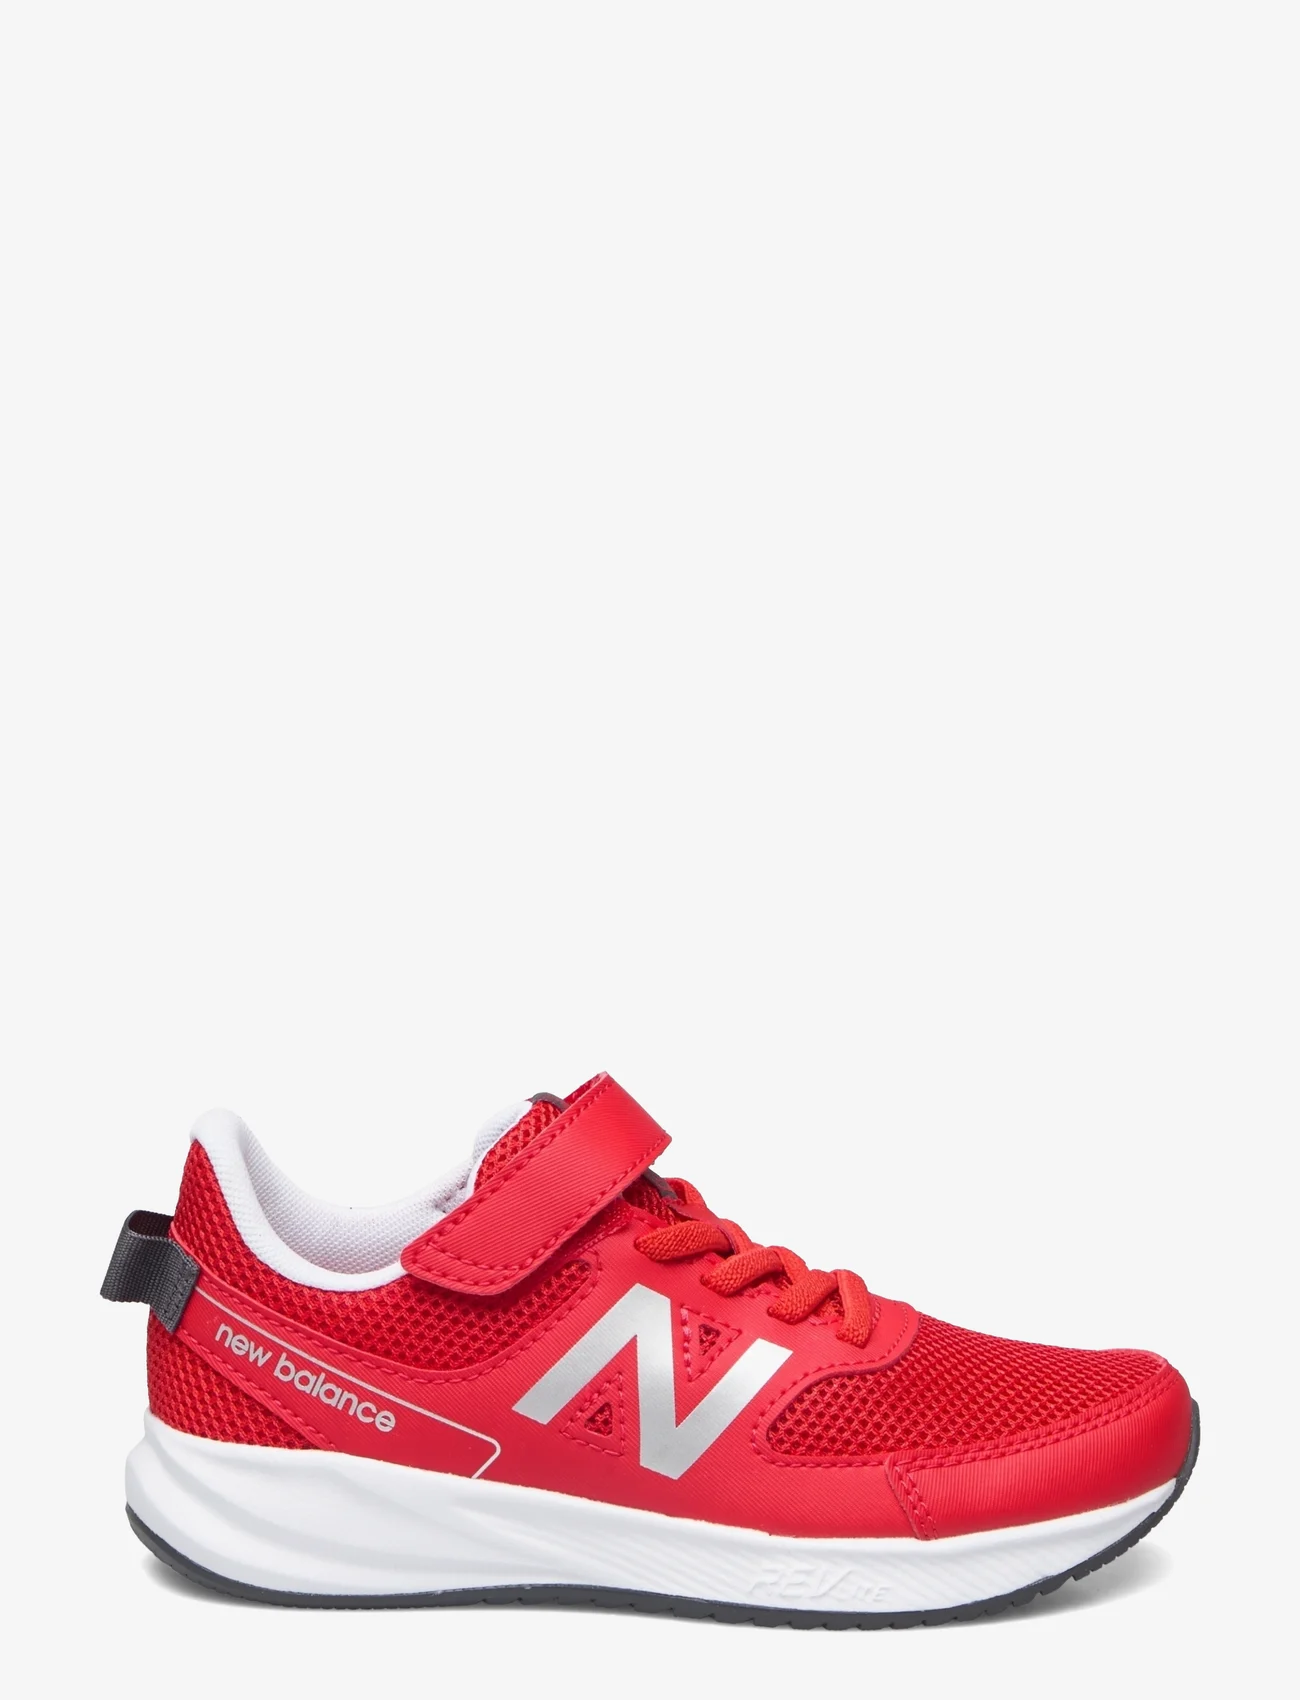 New Balance - New Balance 570 v3 Kids Bungee Lace with Hook & Loop Top Strap - lapset - true red - 1